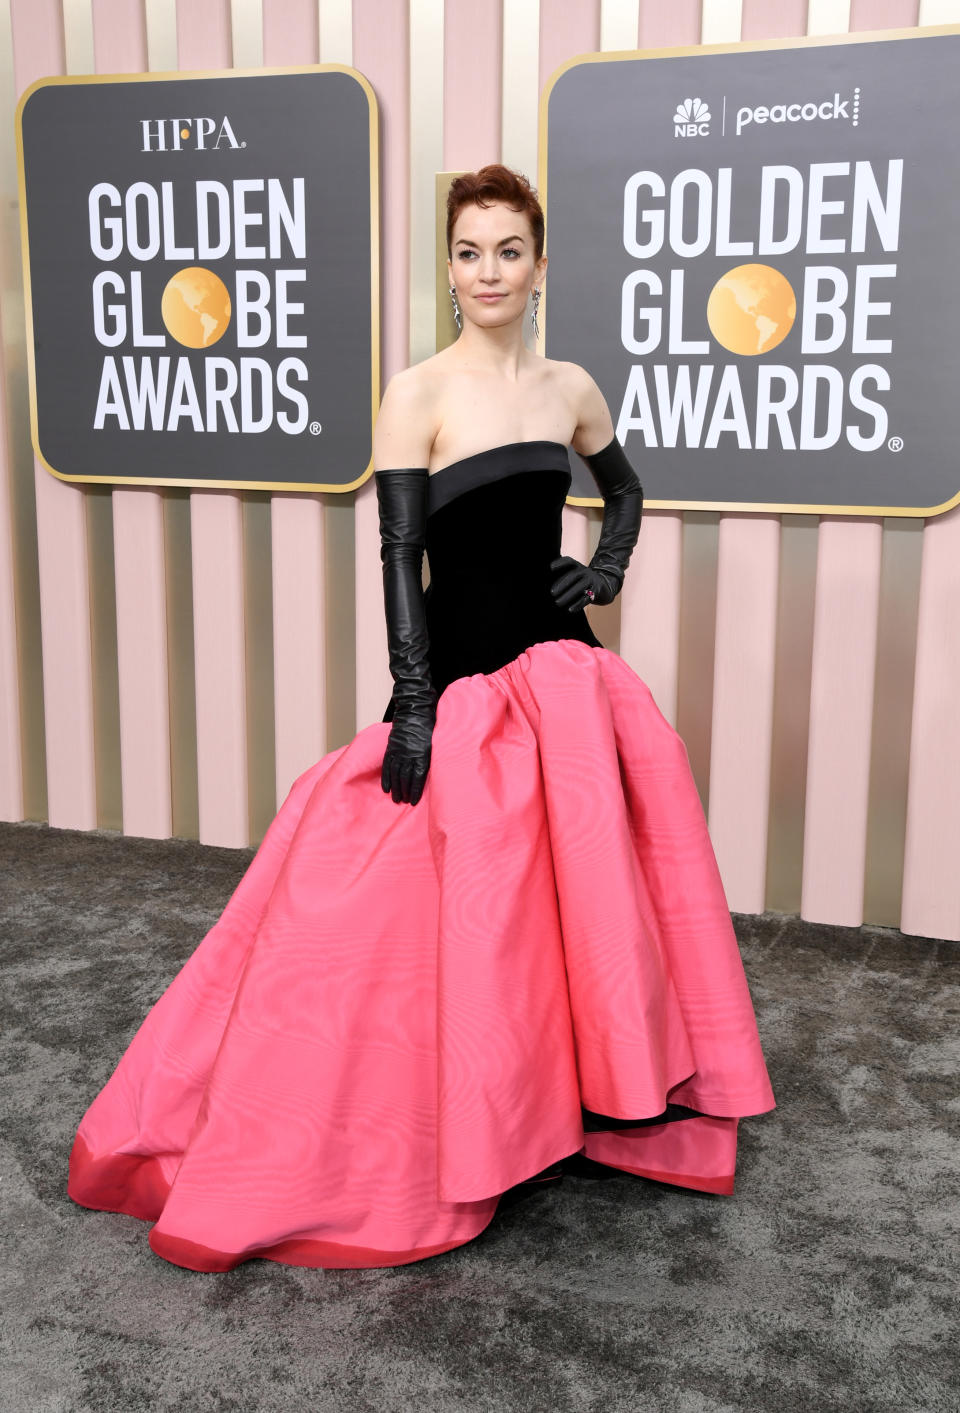 BEVERLY HILLS, CALIFORNIA - JANUARY 10: Britt Lower attends the 80th Annual Golden Globe Awards at The Beverly Hilton on January 10, 2023 in Beverly Hills, California. (Photo by Jon Kopaloff/Getty Images)